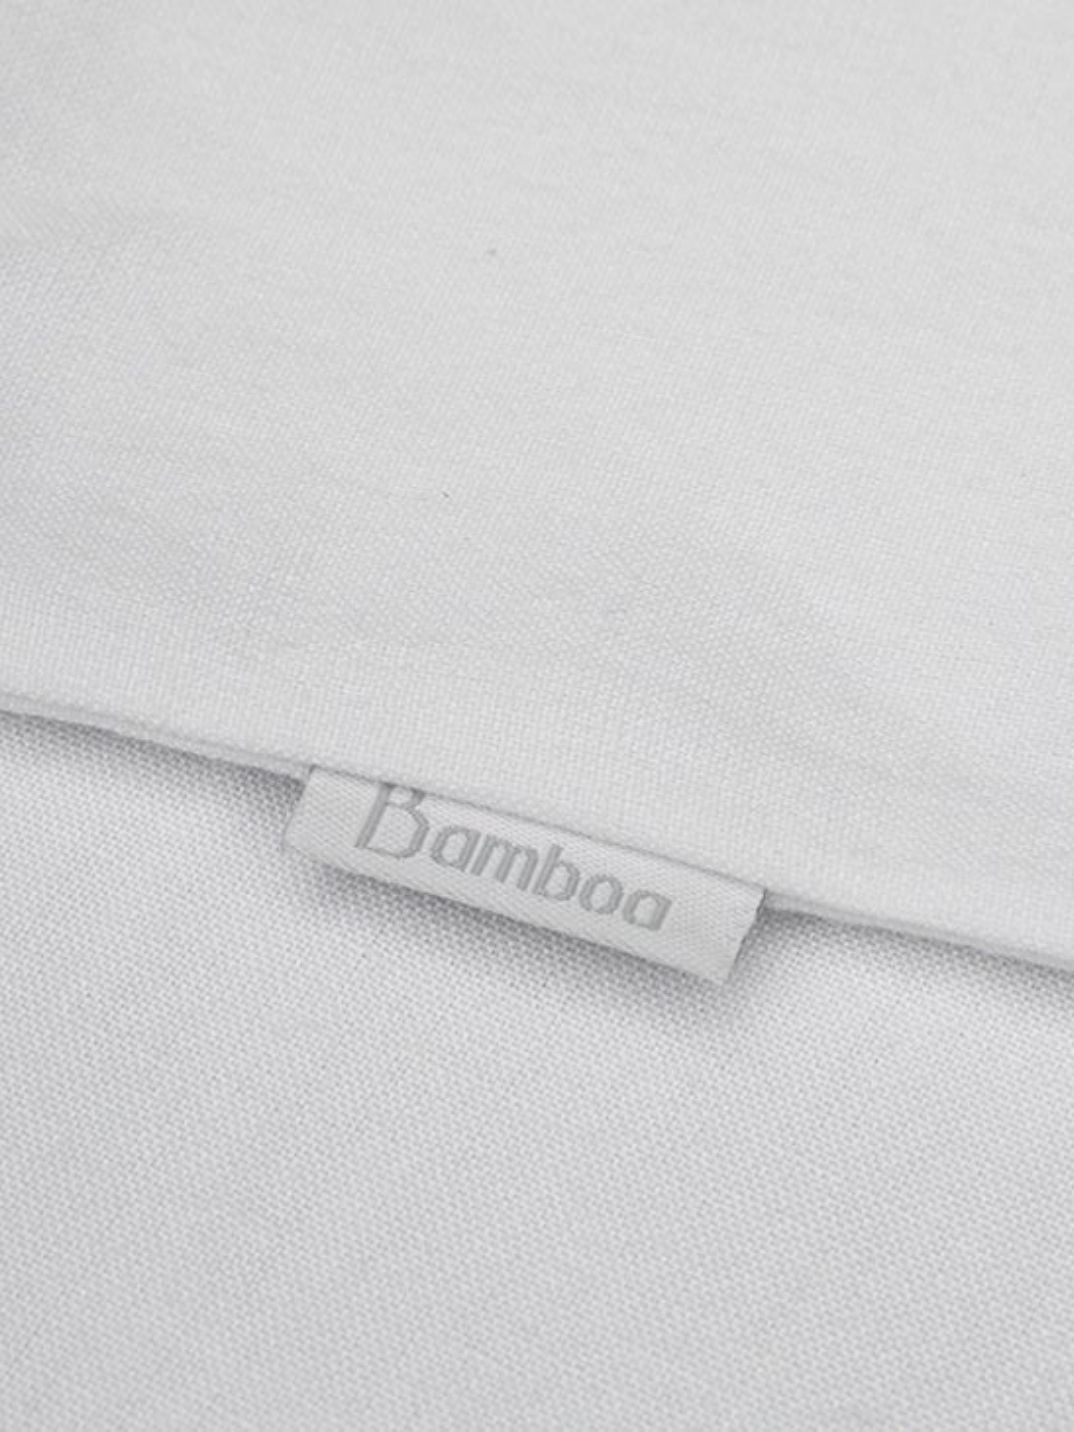 bamboo flax & French linen flat sheet eco-friendly home bedding